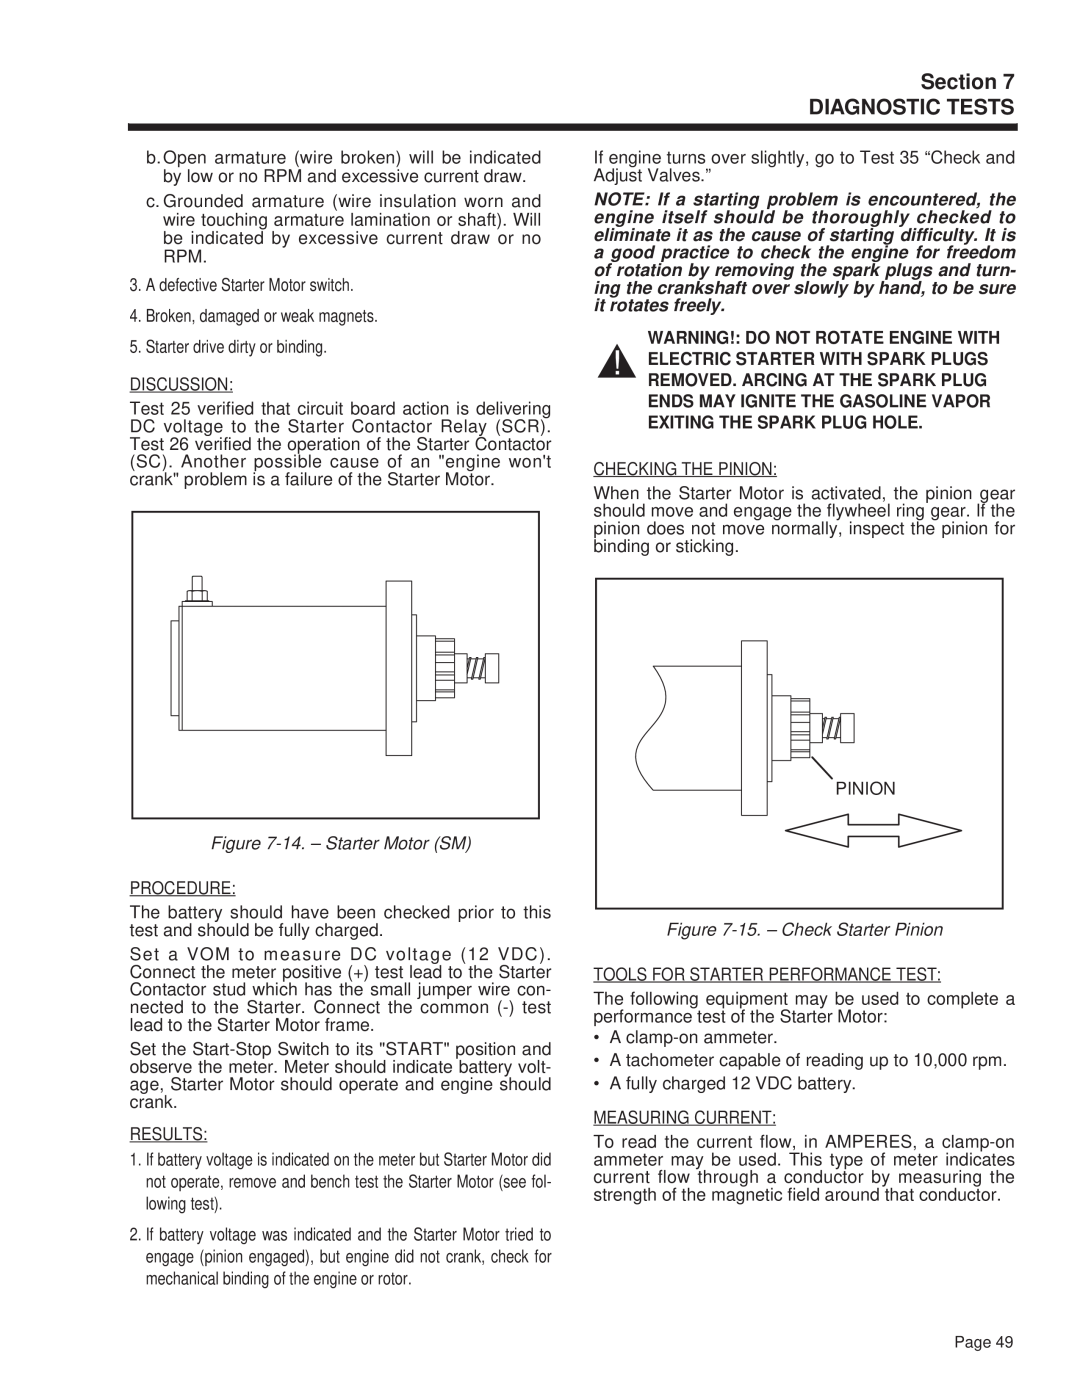 Guardian Technologies 4270 manual 14. - Starter Motor SM, 15. - Check Starter Pinion, Section DIAGNOSTIC TESTS 